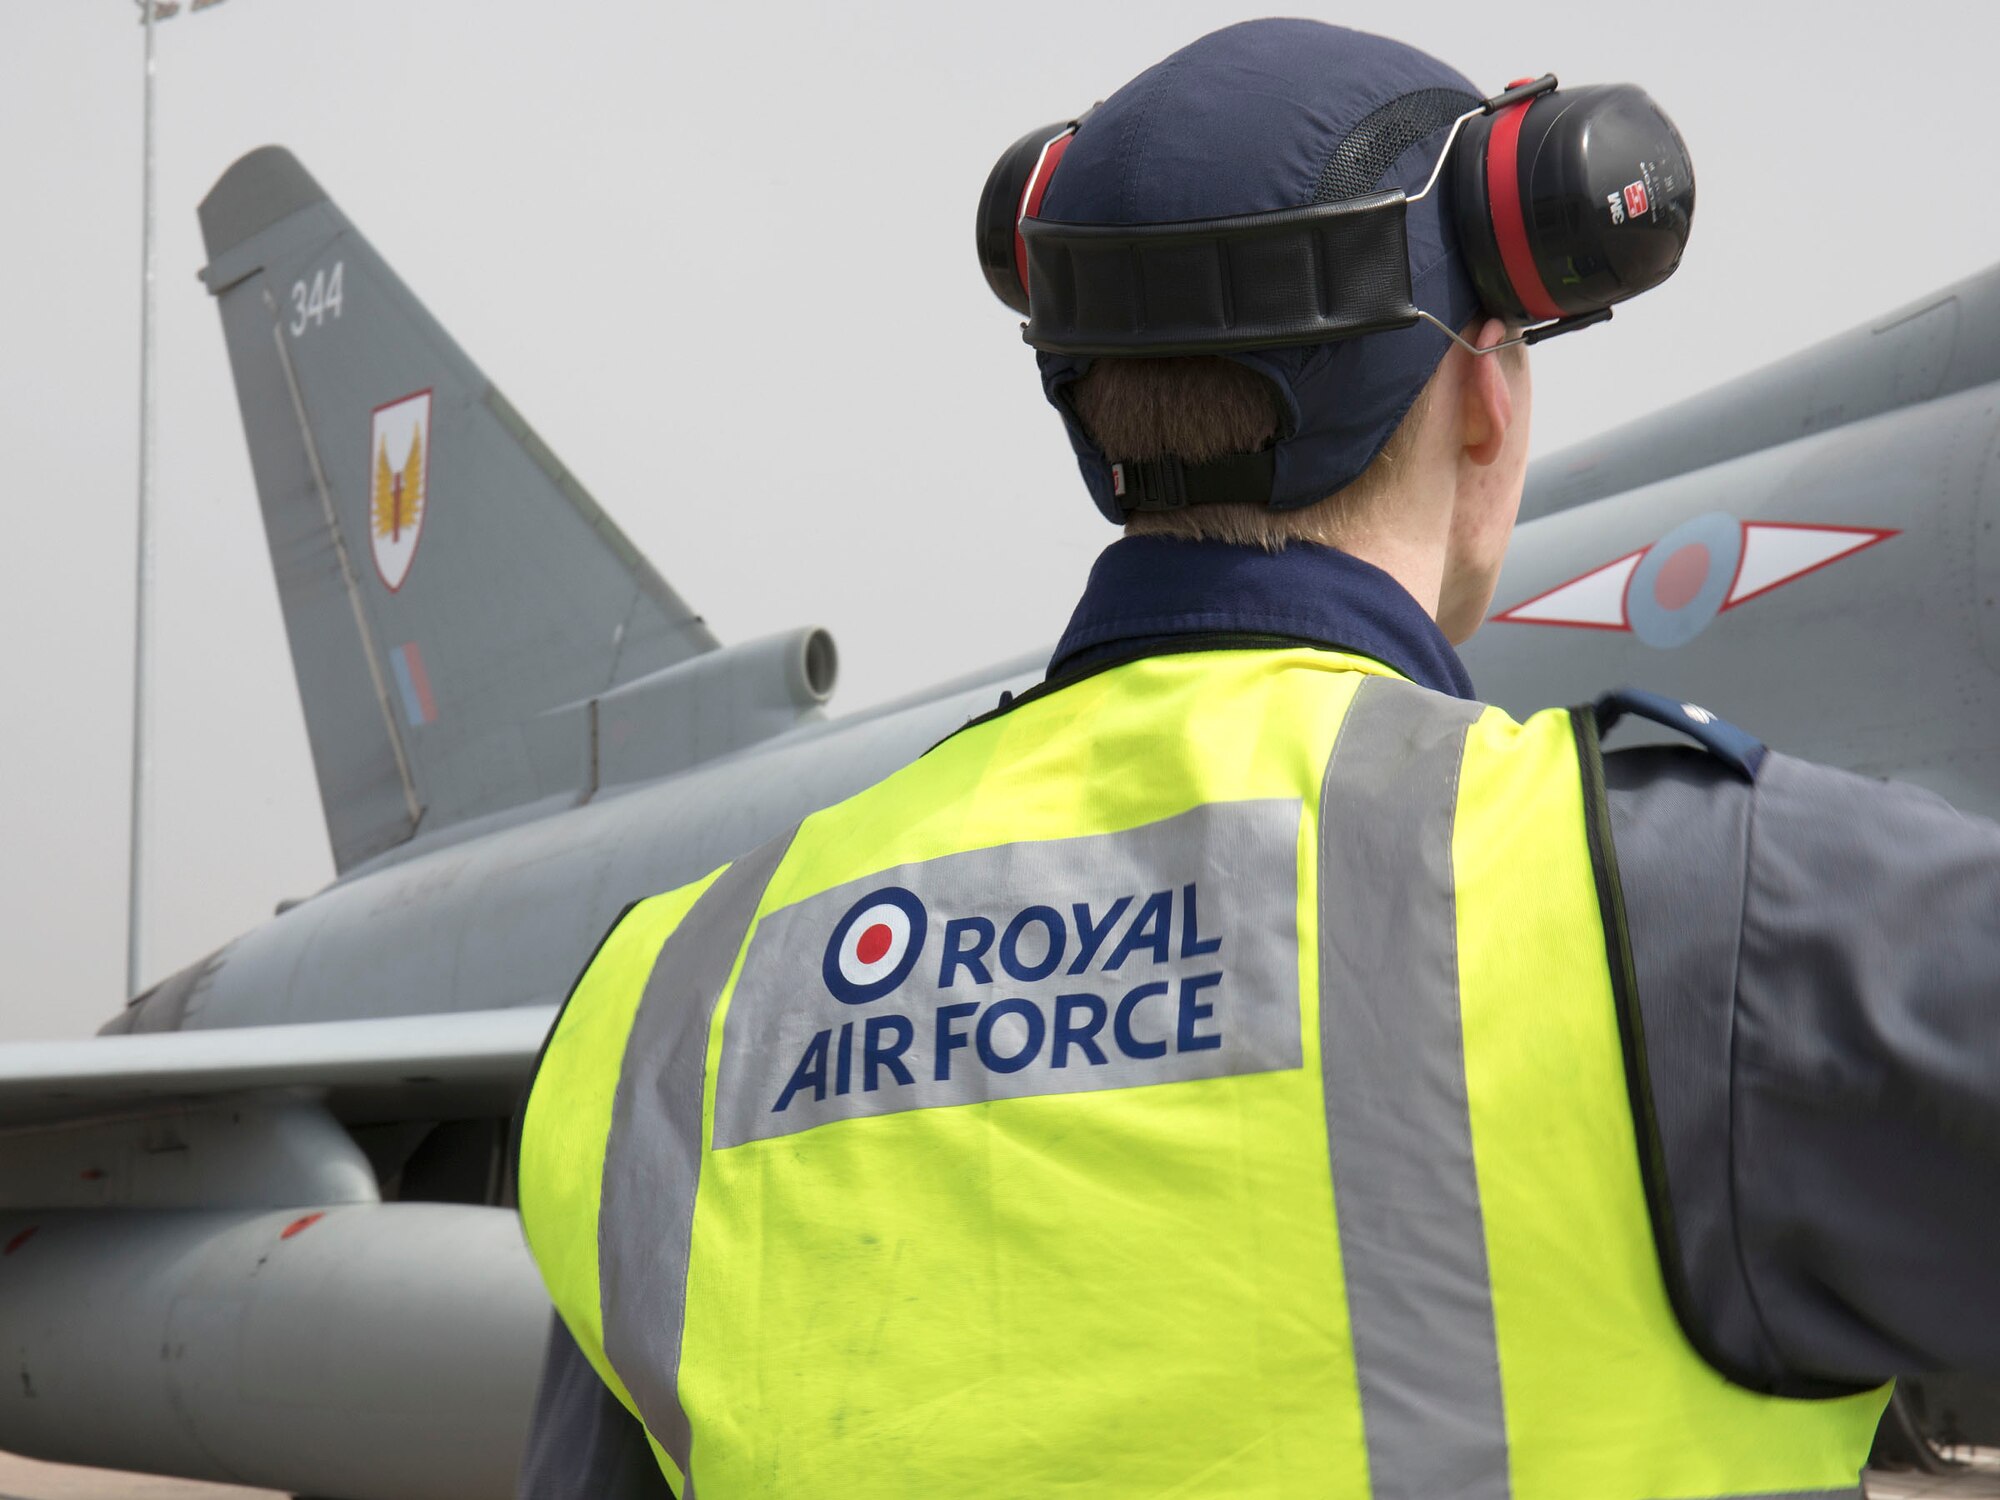 A Royal Air Force crew chief marshals a Eurofighter Typhoon assigned to the RAF 1 Squadron  at RAF Lossiemouth, Scotland, in support of Exercise POINTBLANK May 24, 2018. The objective is to prepare Coalition warfighters for a highly contested fight against near-peer adversaries by providing a multi-dimensional battle-space to conduct advanced training in support of U.S. and U.K. national interests. (Courtesy photo/ Crown Copyright)